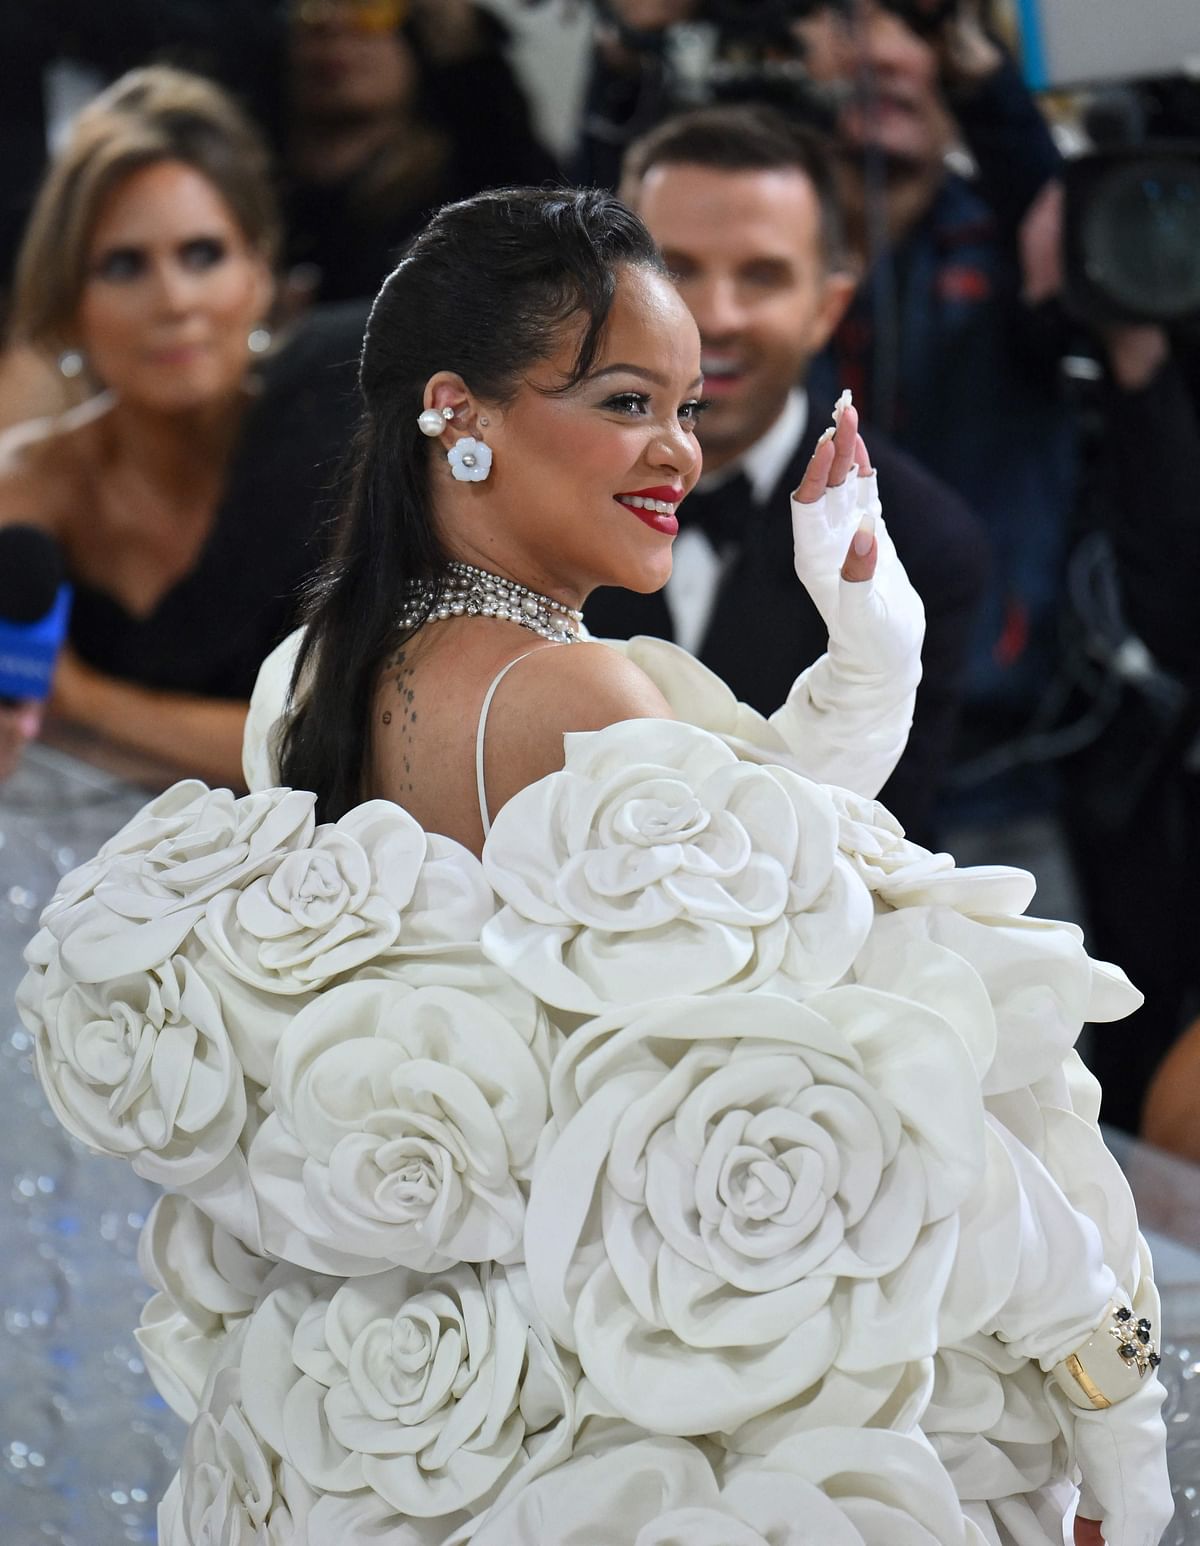 Barbadian singer Rihanna arrives for the 2023 Met Gala at the Metropolitan Museum of Art on1st  May, 2023, in New York. The Gala raises money for the Metropolitan Museum of Art's Costume Institute. The Gala's 2023 theme is “Karl Lagerfeld: A Line of Beauty.”